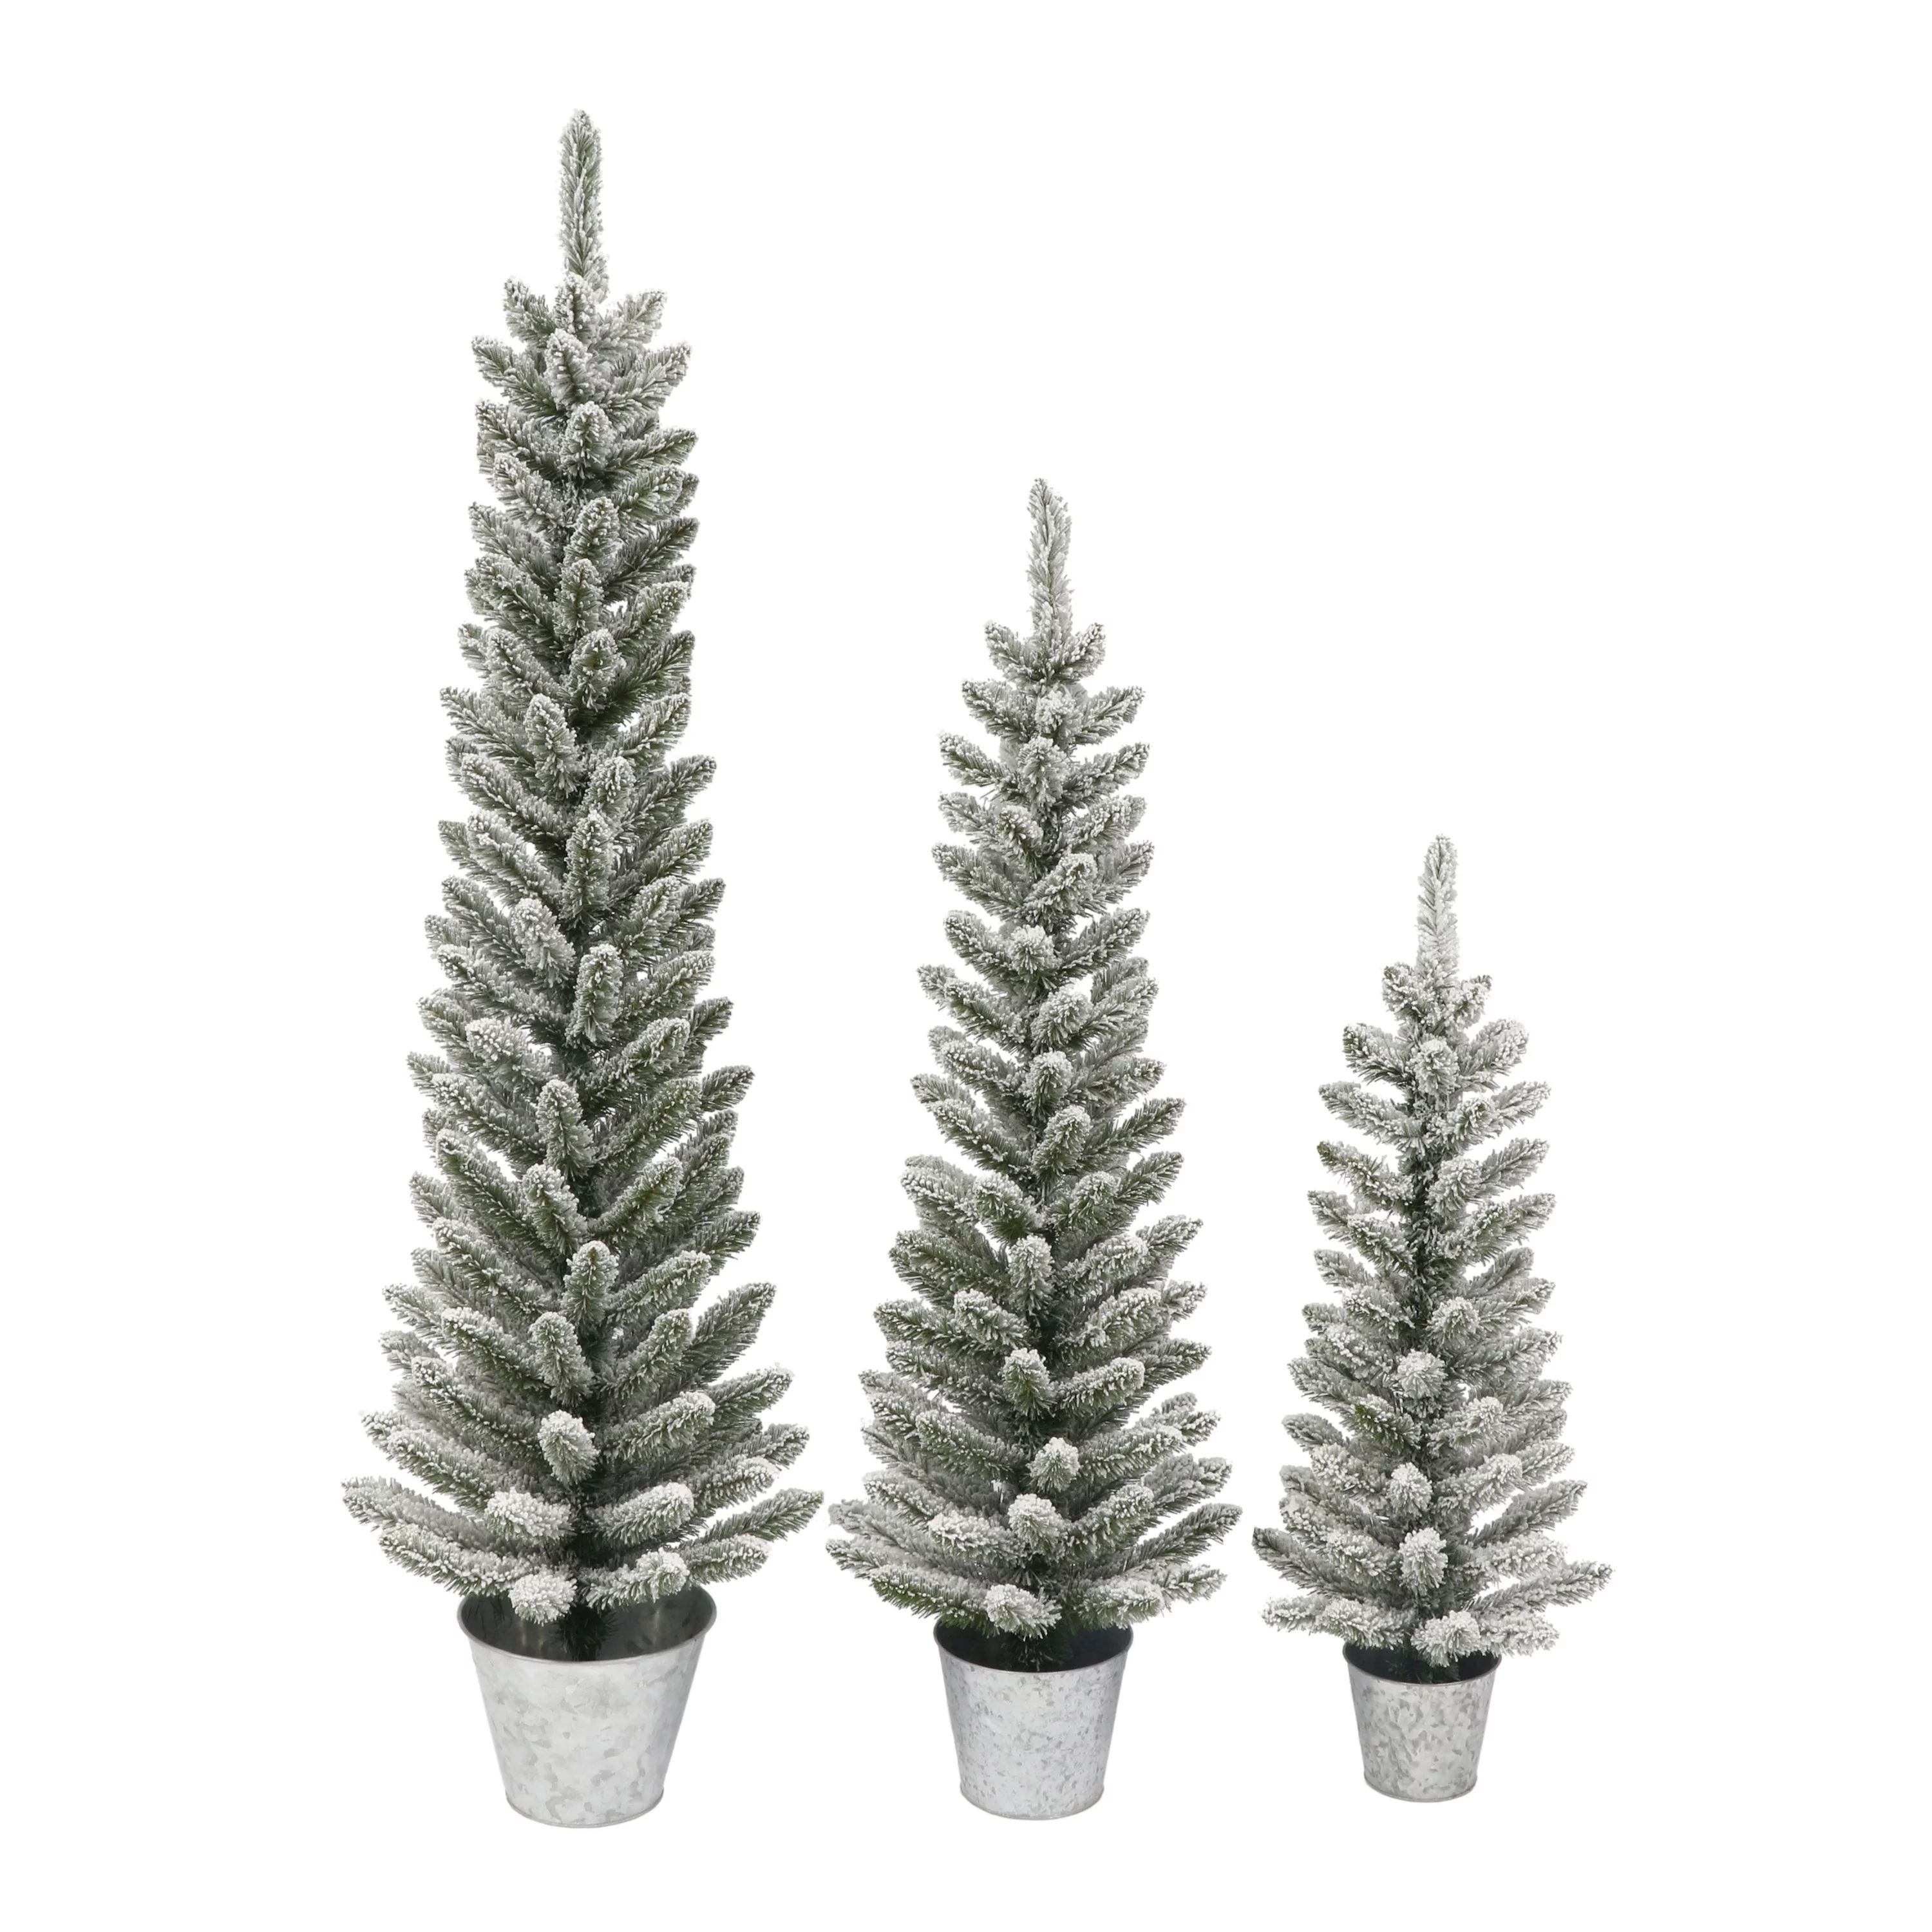 Potted Flocked Pencil Trees in 3ft 4ft & 5ft sizes 322 Tips Galvanized Pot | Walmart (US)